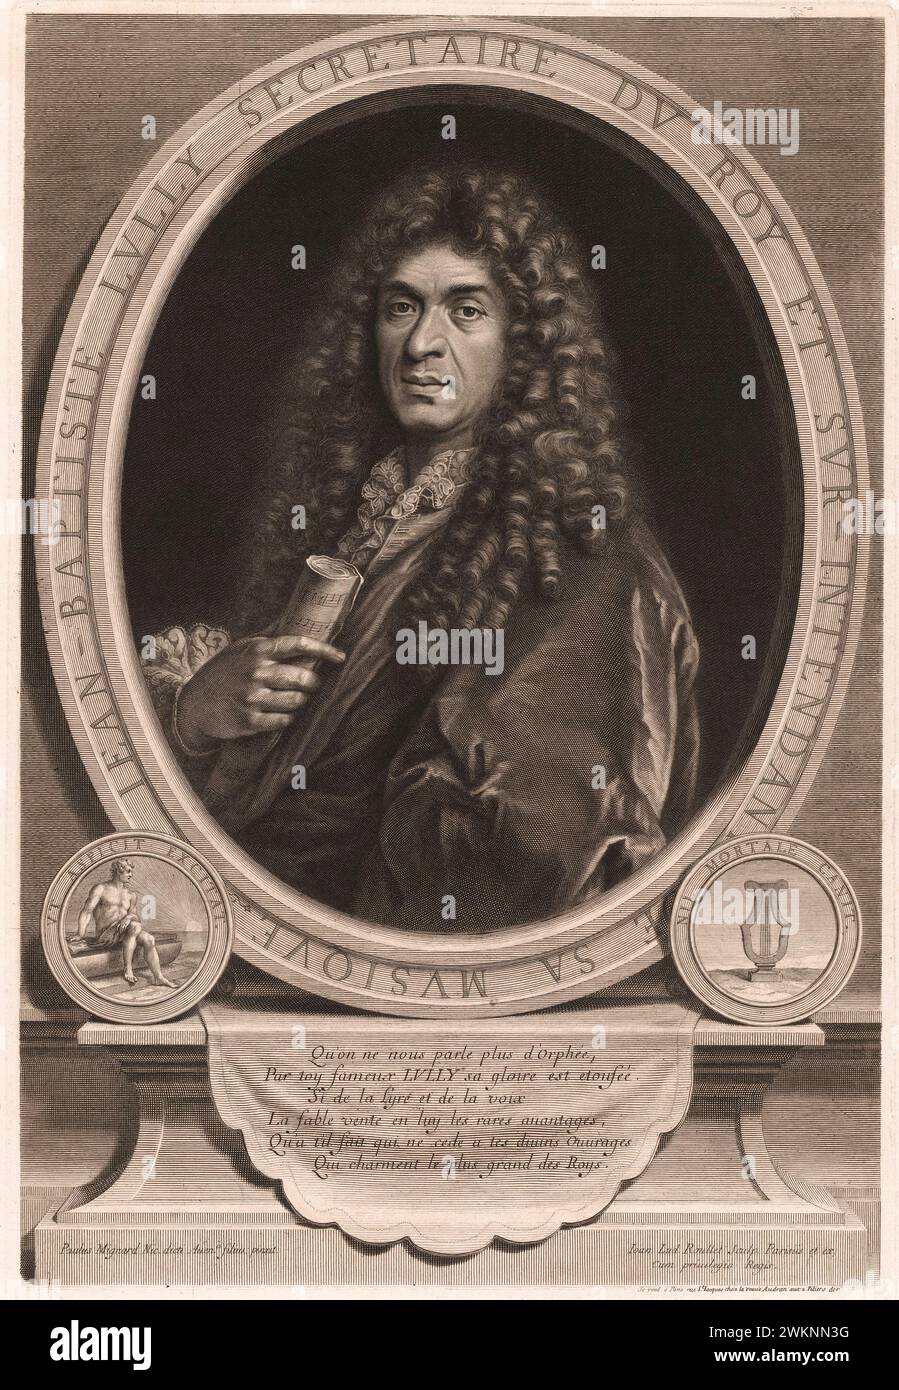 1670 ca, FRANCE : The italian- french baroque music composer Jean Baptiste LULLY  ( Giovanni Battista  LULLI , 1633 - 1687 ) at King LOUIS XIV court . Portait engraving by Jean Ludovic ROULLET from original design by painter Paul MIGNARD, pubblished in Paris .  - Re Sole - Luigi XIV - BAROCCO - BAROQUE - musica classica barocca - CLASSICAL - MUSICA CLASSICA BAROCCA - classical - COMPOSITORE BAROCCO - BAROQUE - incisione - Granducato di Toscana - Giovanni Battista - Giovanbattista - Giovan Battista - GAY - omosessuale - omosessualità - homosexuality - homosexual - GLBTQ - curls - riccioli - boc Stock Photo